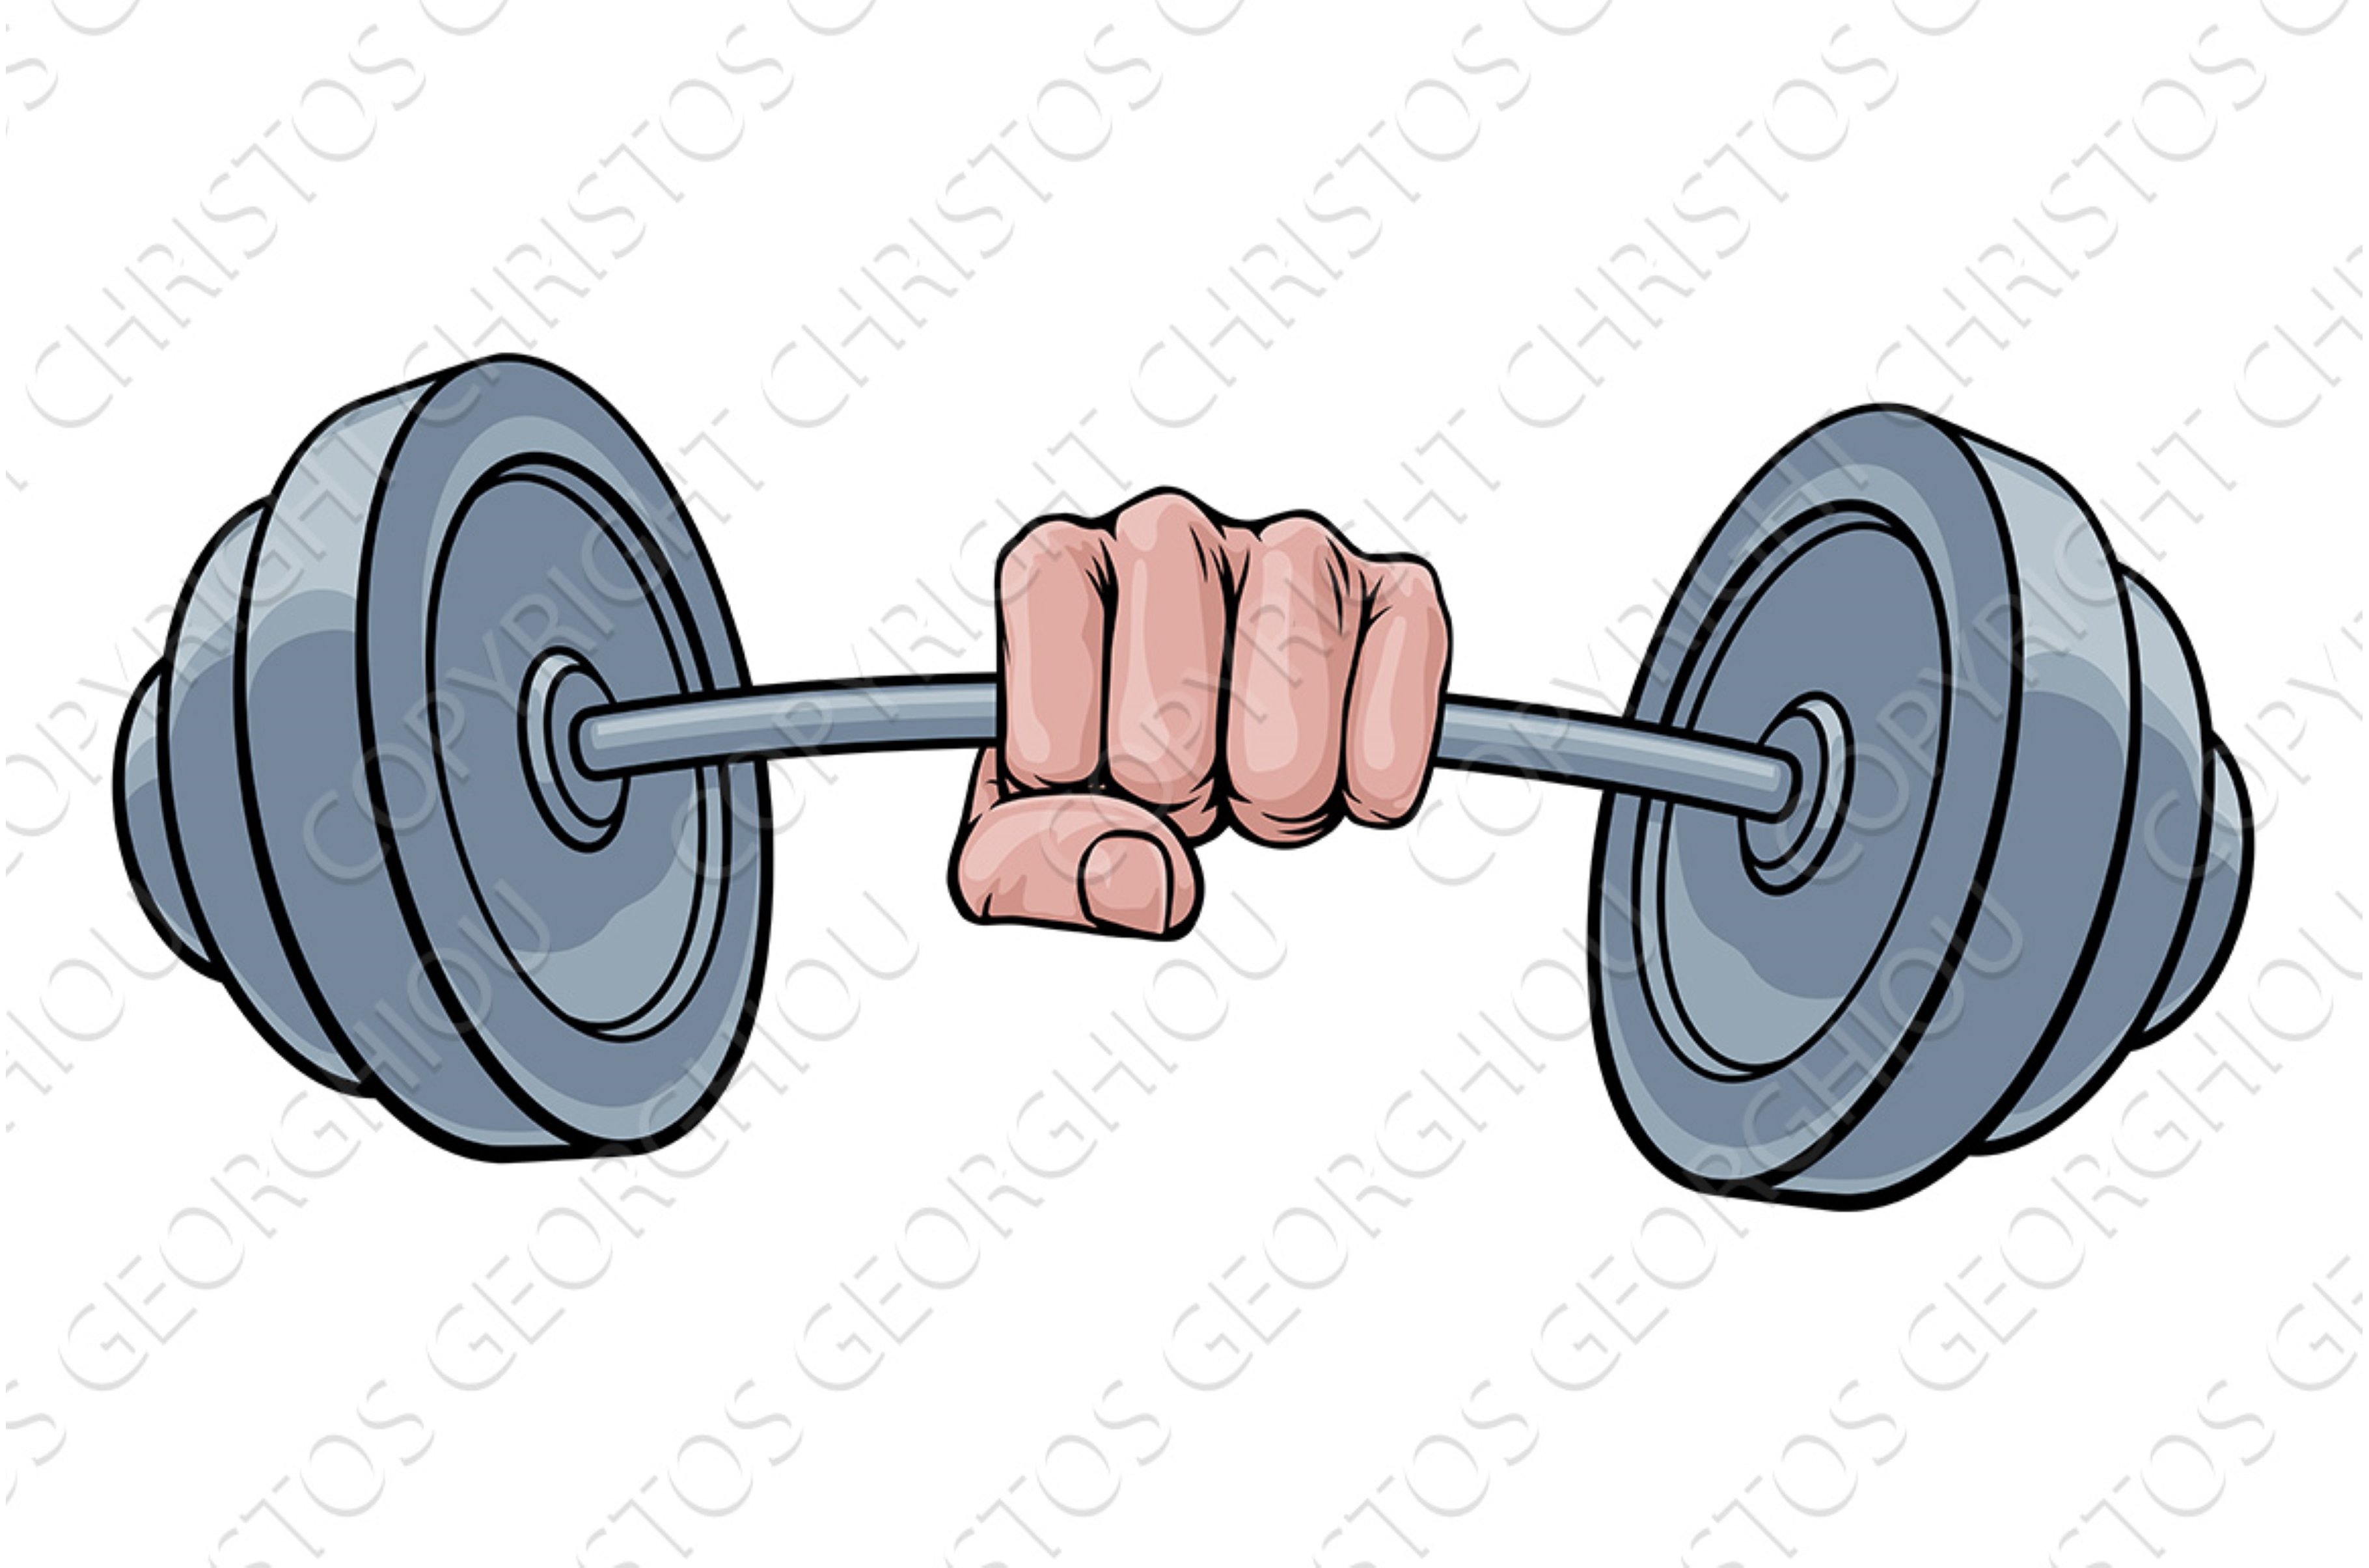 Weight Lifting Fist Hand Holding cover image.